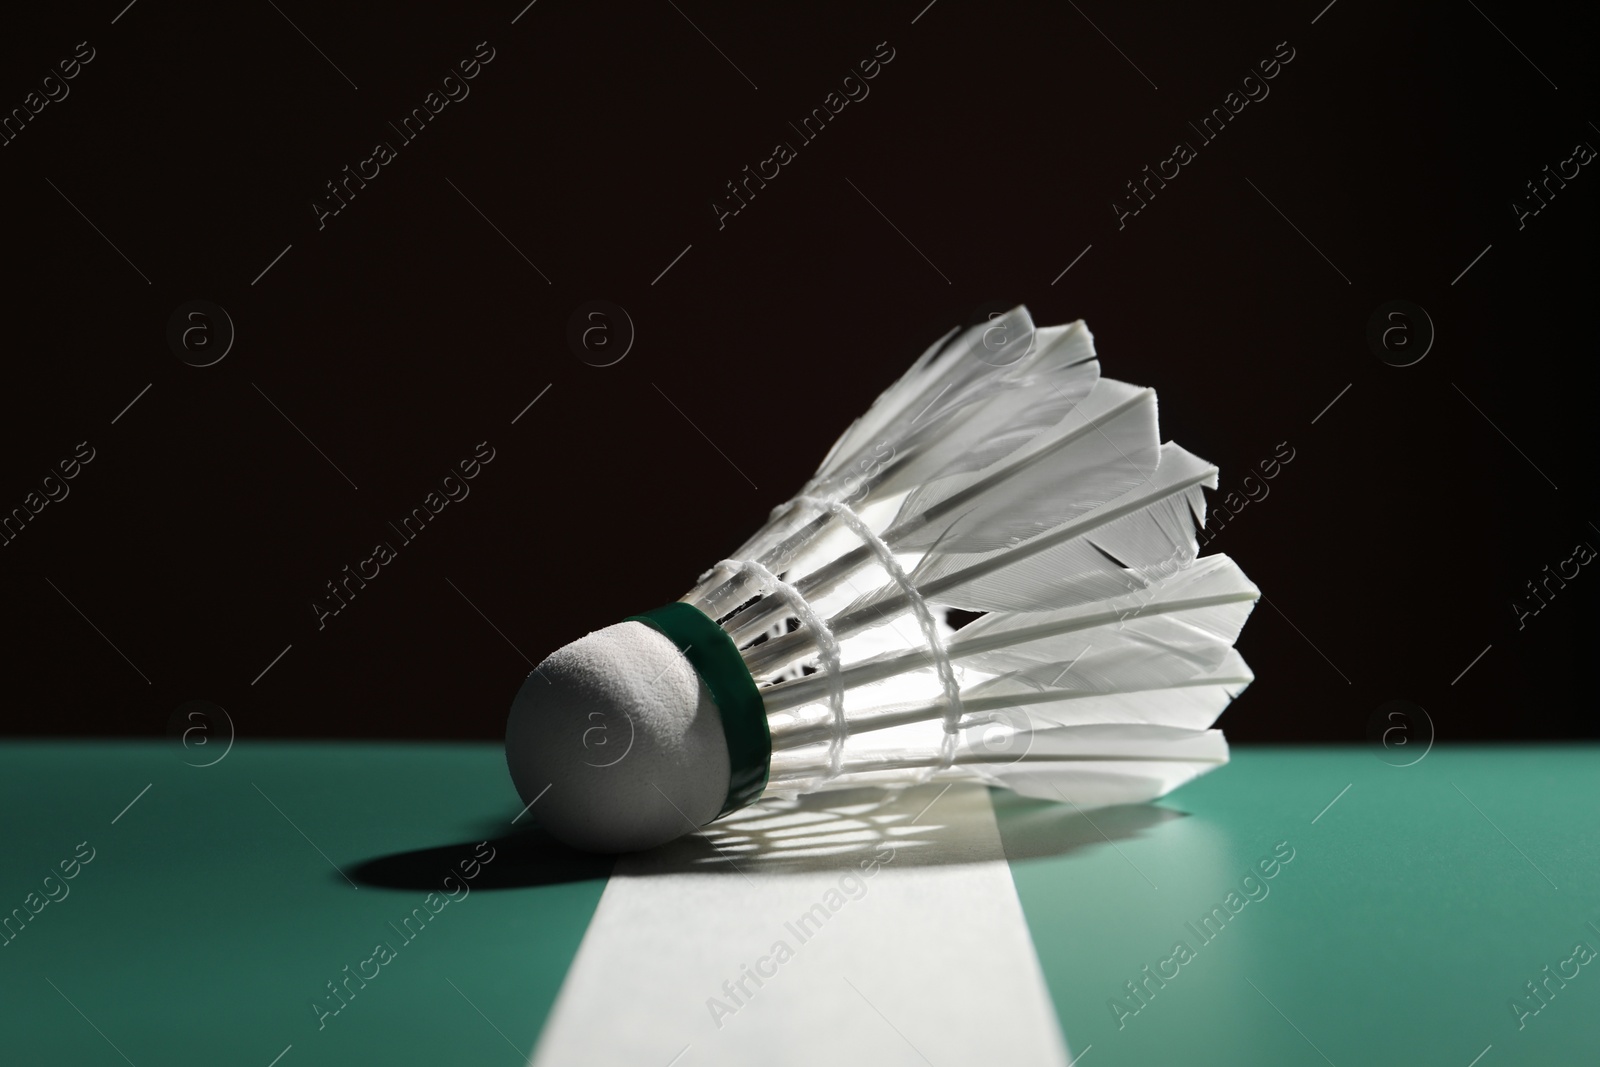 Photo of Feather badminton shuttlecock on green table against dark background